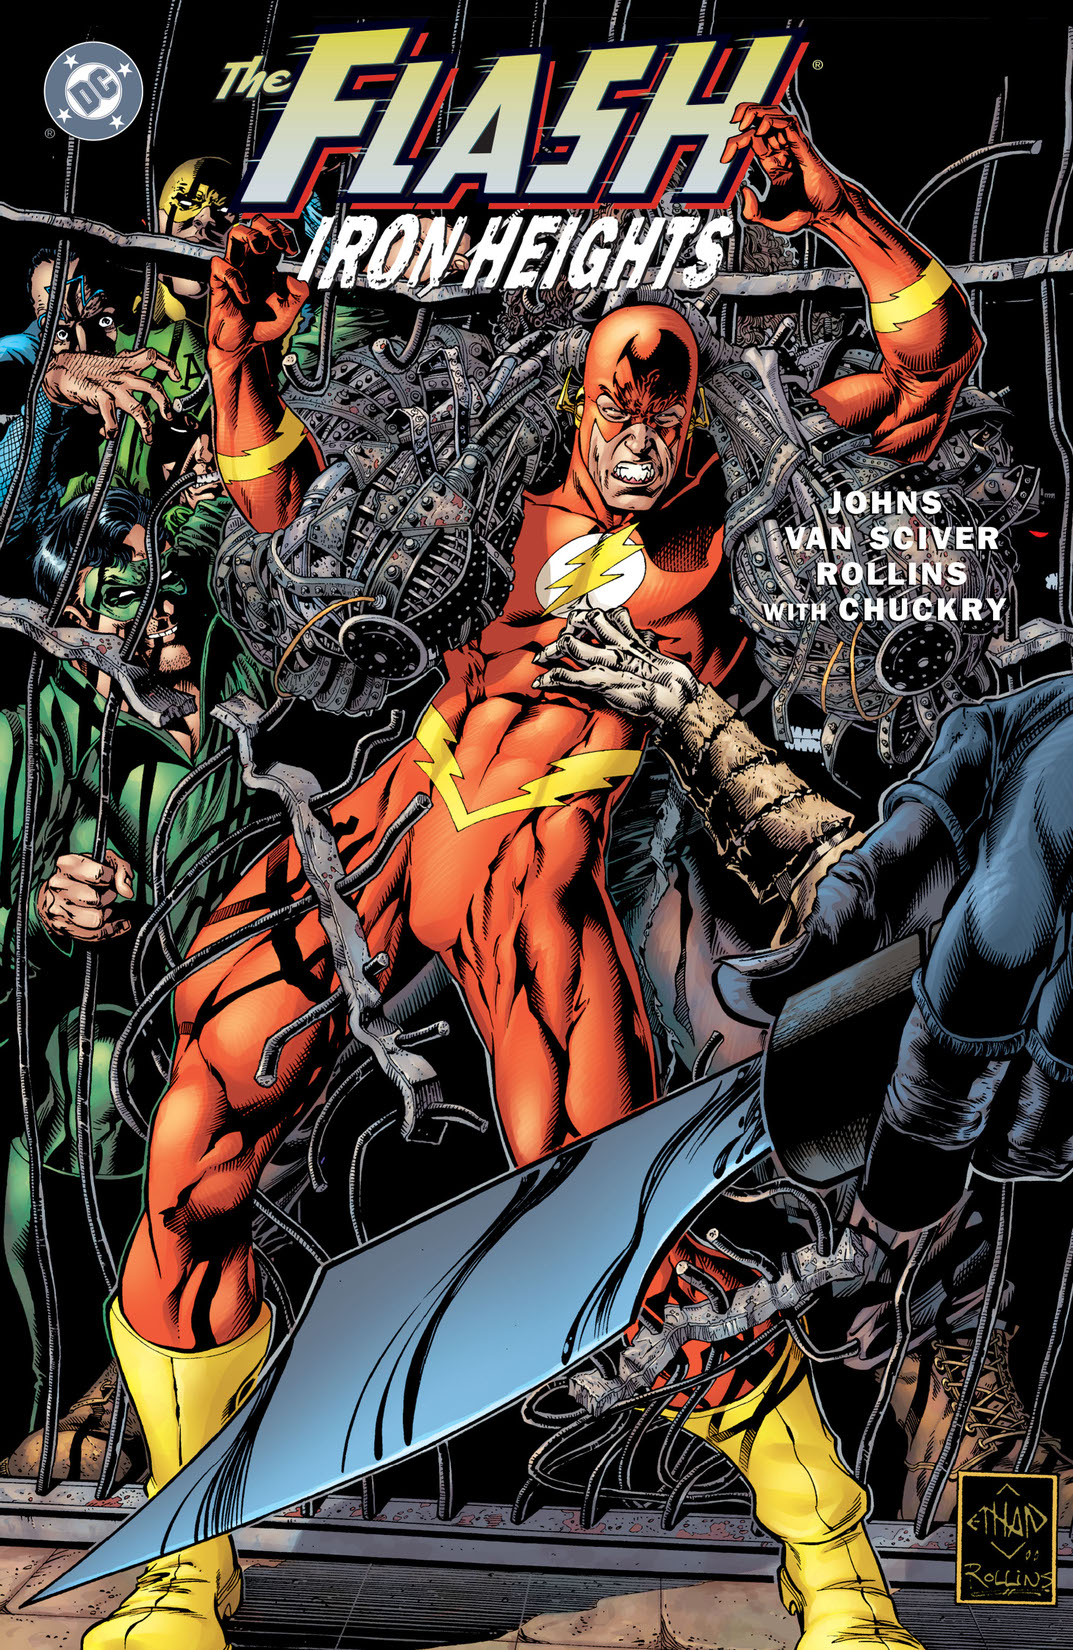 The Flash: Iron Heights #1 preview images